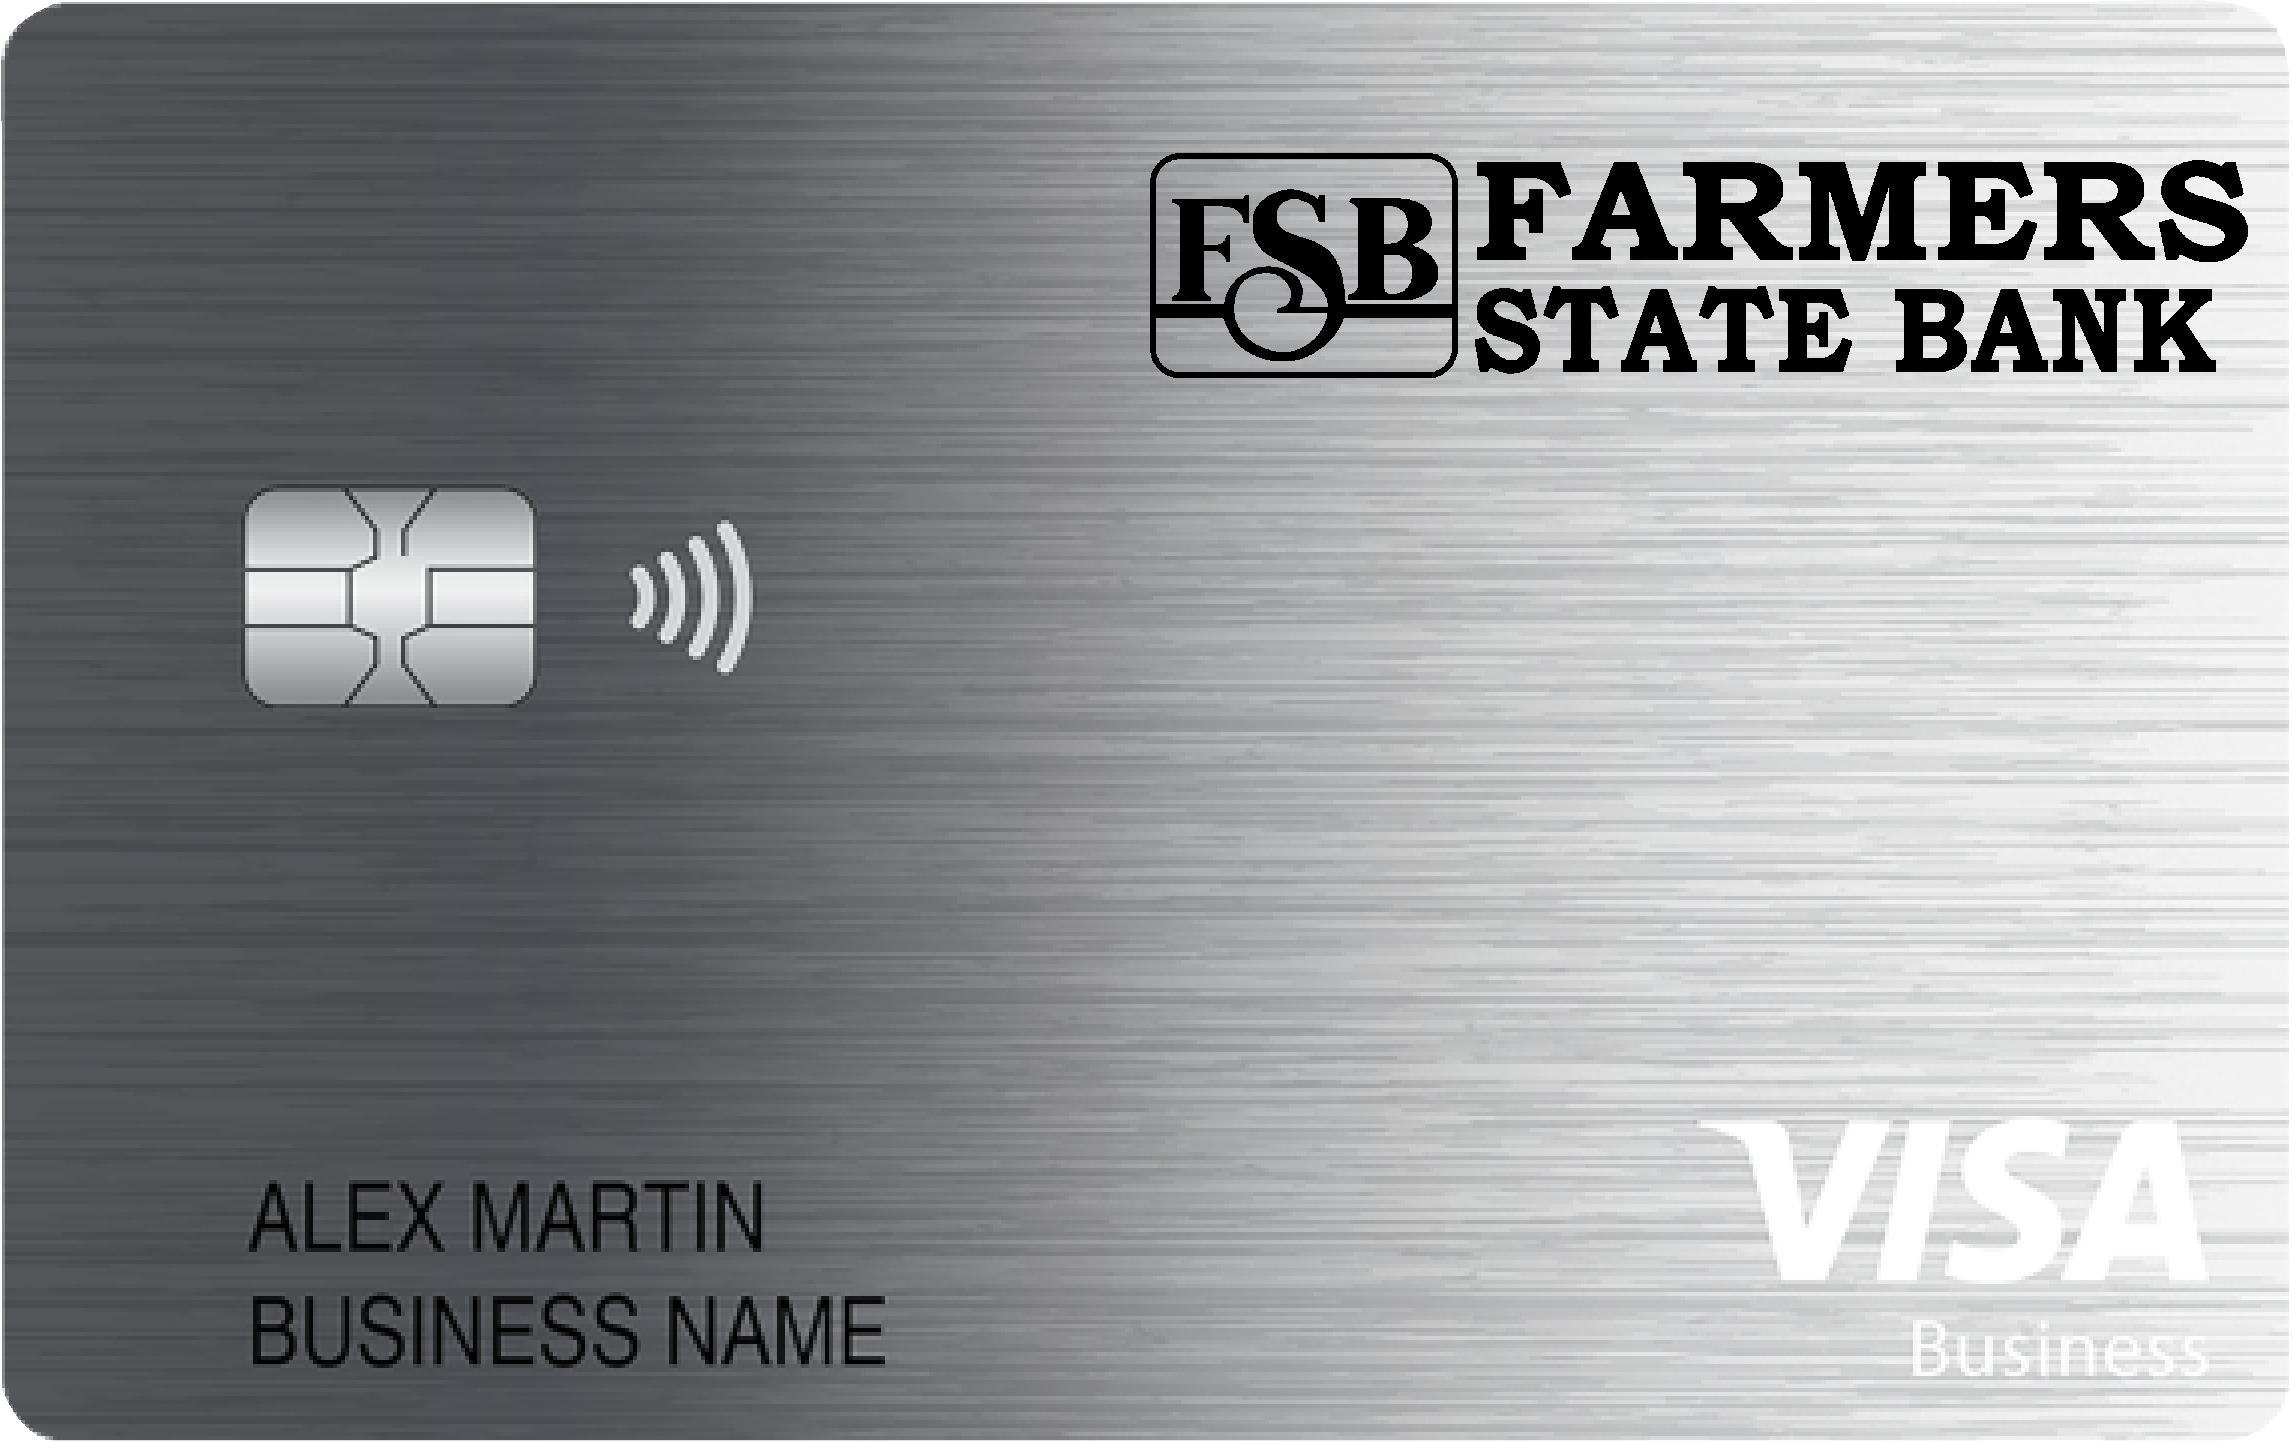 Farmers State Bank Business Cash Preferred Card